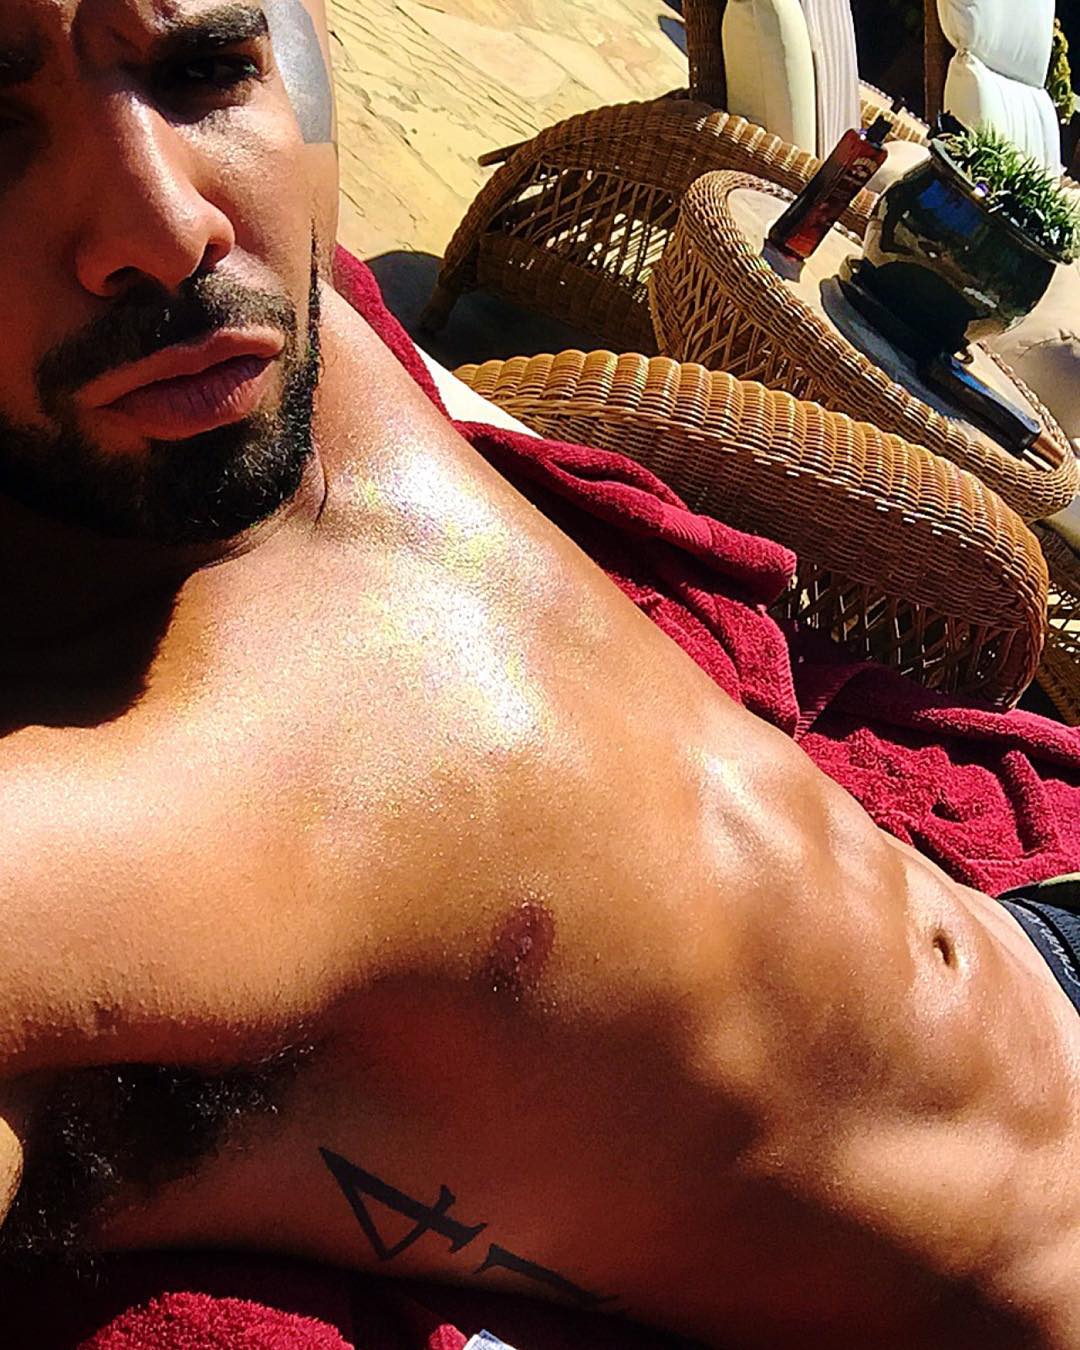 Some sexy pics of Drake, for no particular reason, other than he is HOT! 